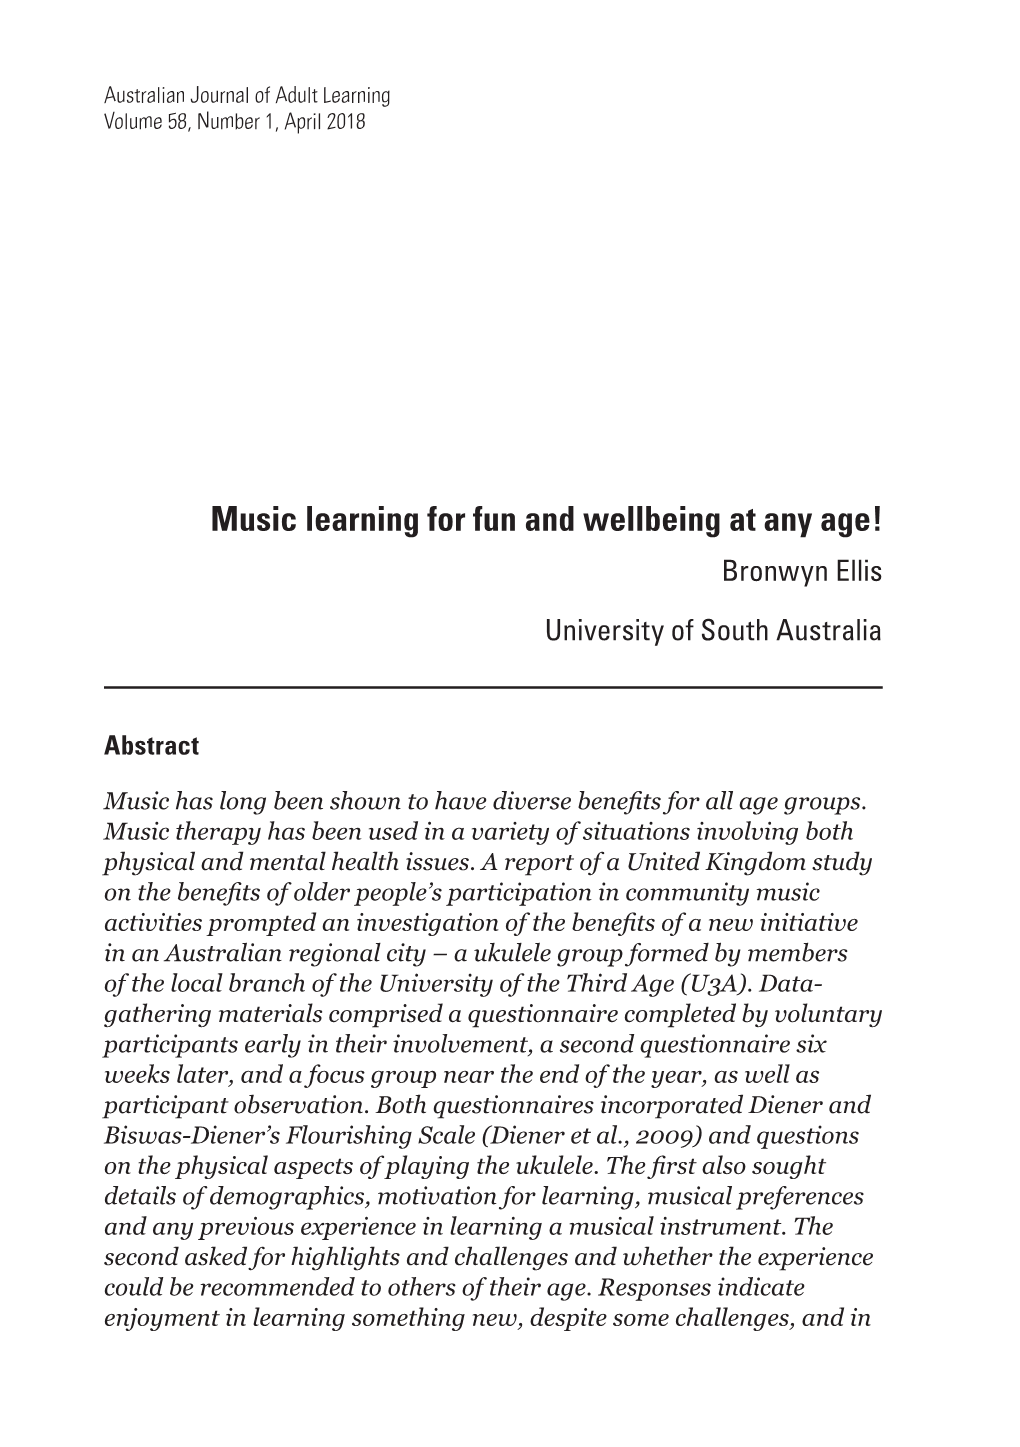 Music Learning for Fun and Wellbeing at Any Age! Bronwyn Ellis